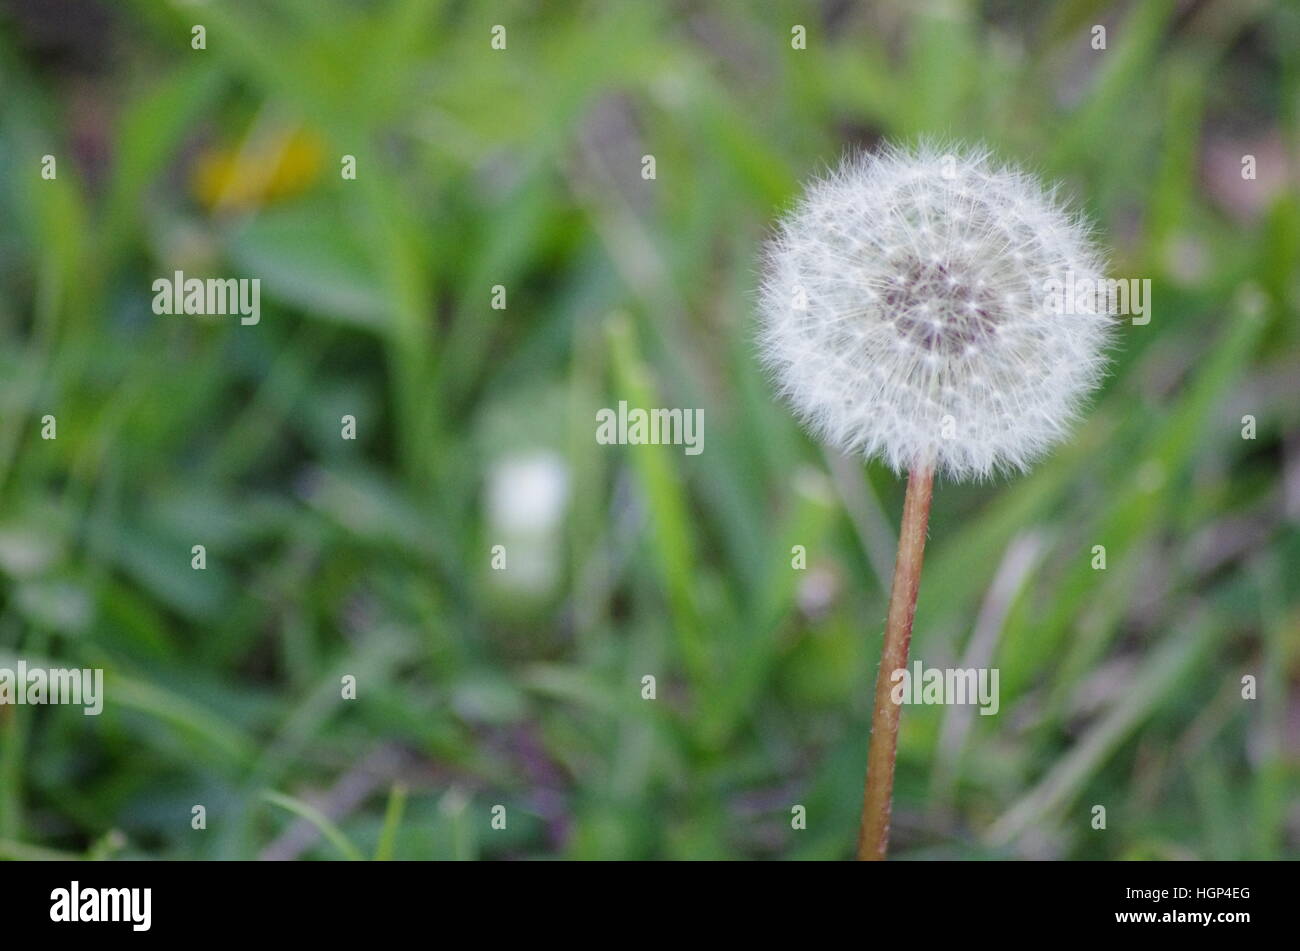 Full white dandelion fluff off-center on brown fuzzy stem with green grass blurry background Stock Photo